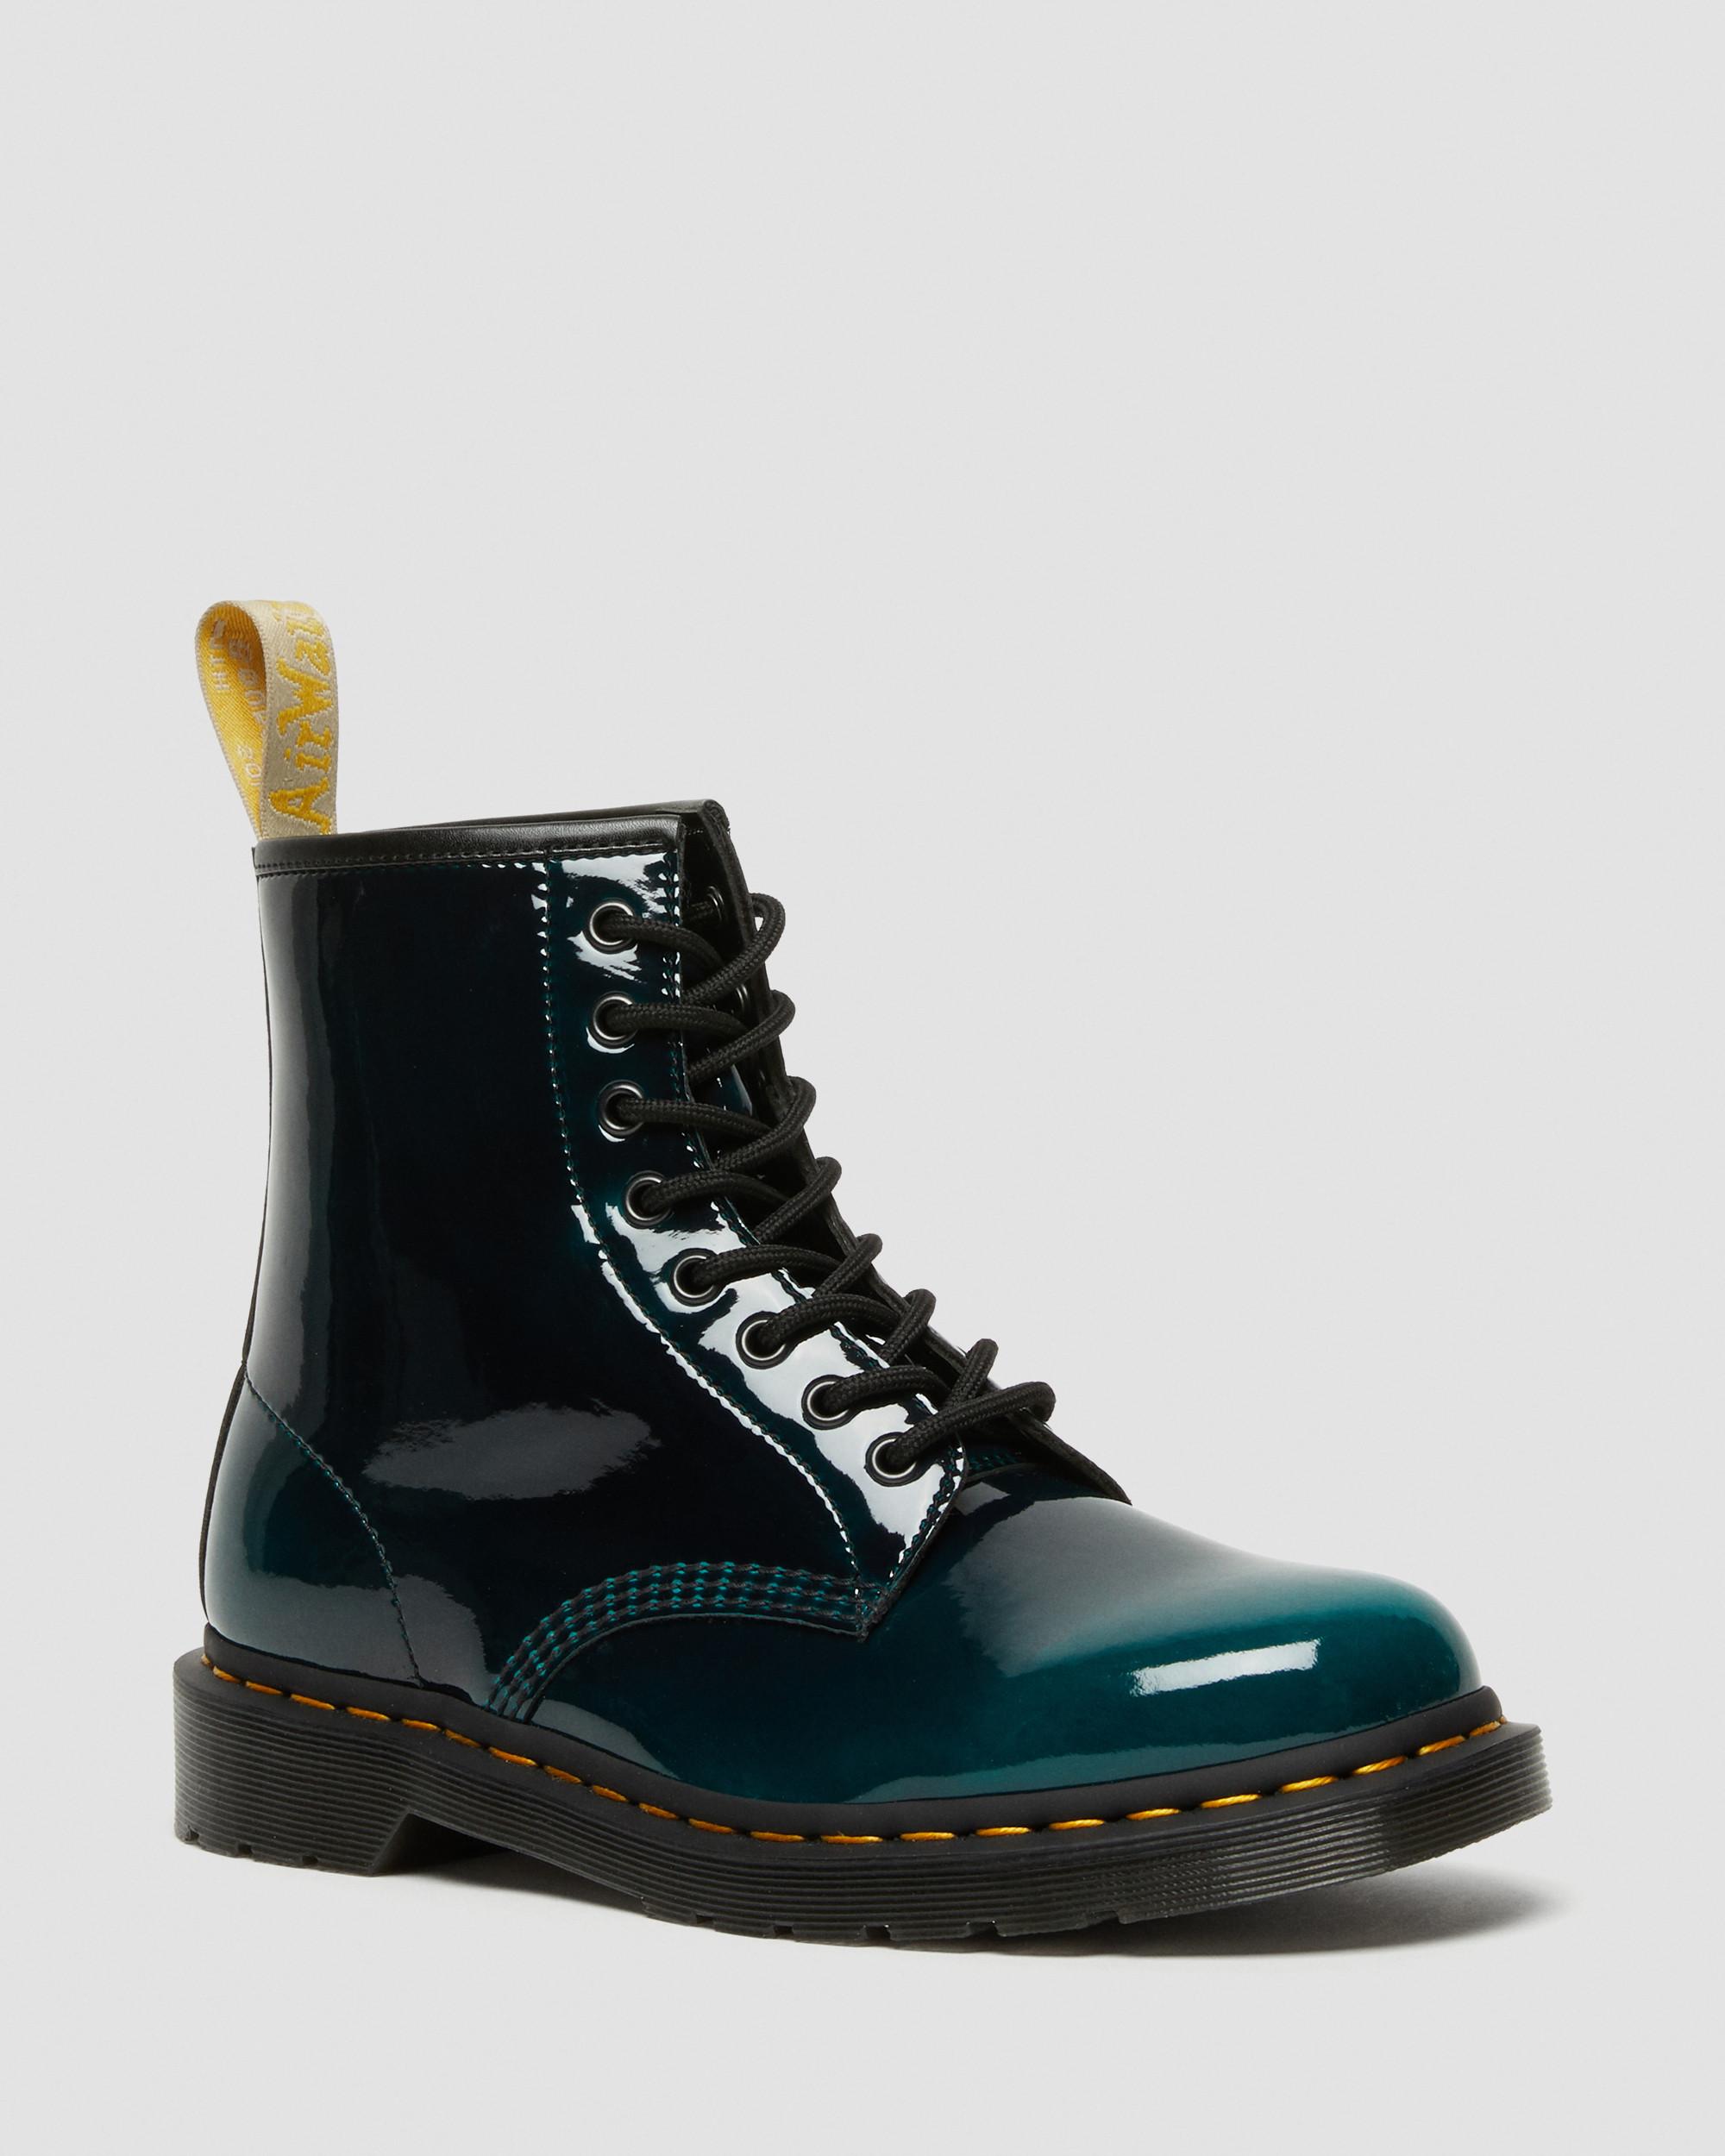 Vegan 1460 Gloss Lace Up Boots | Dr. Martens